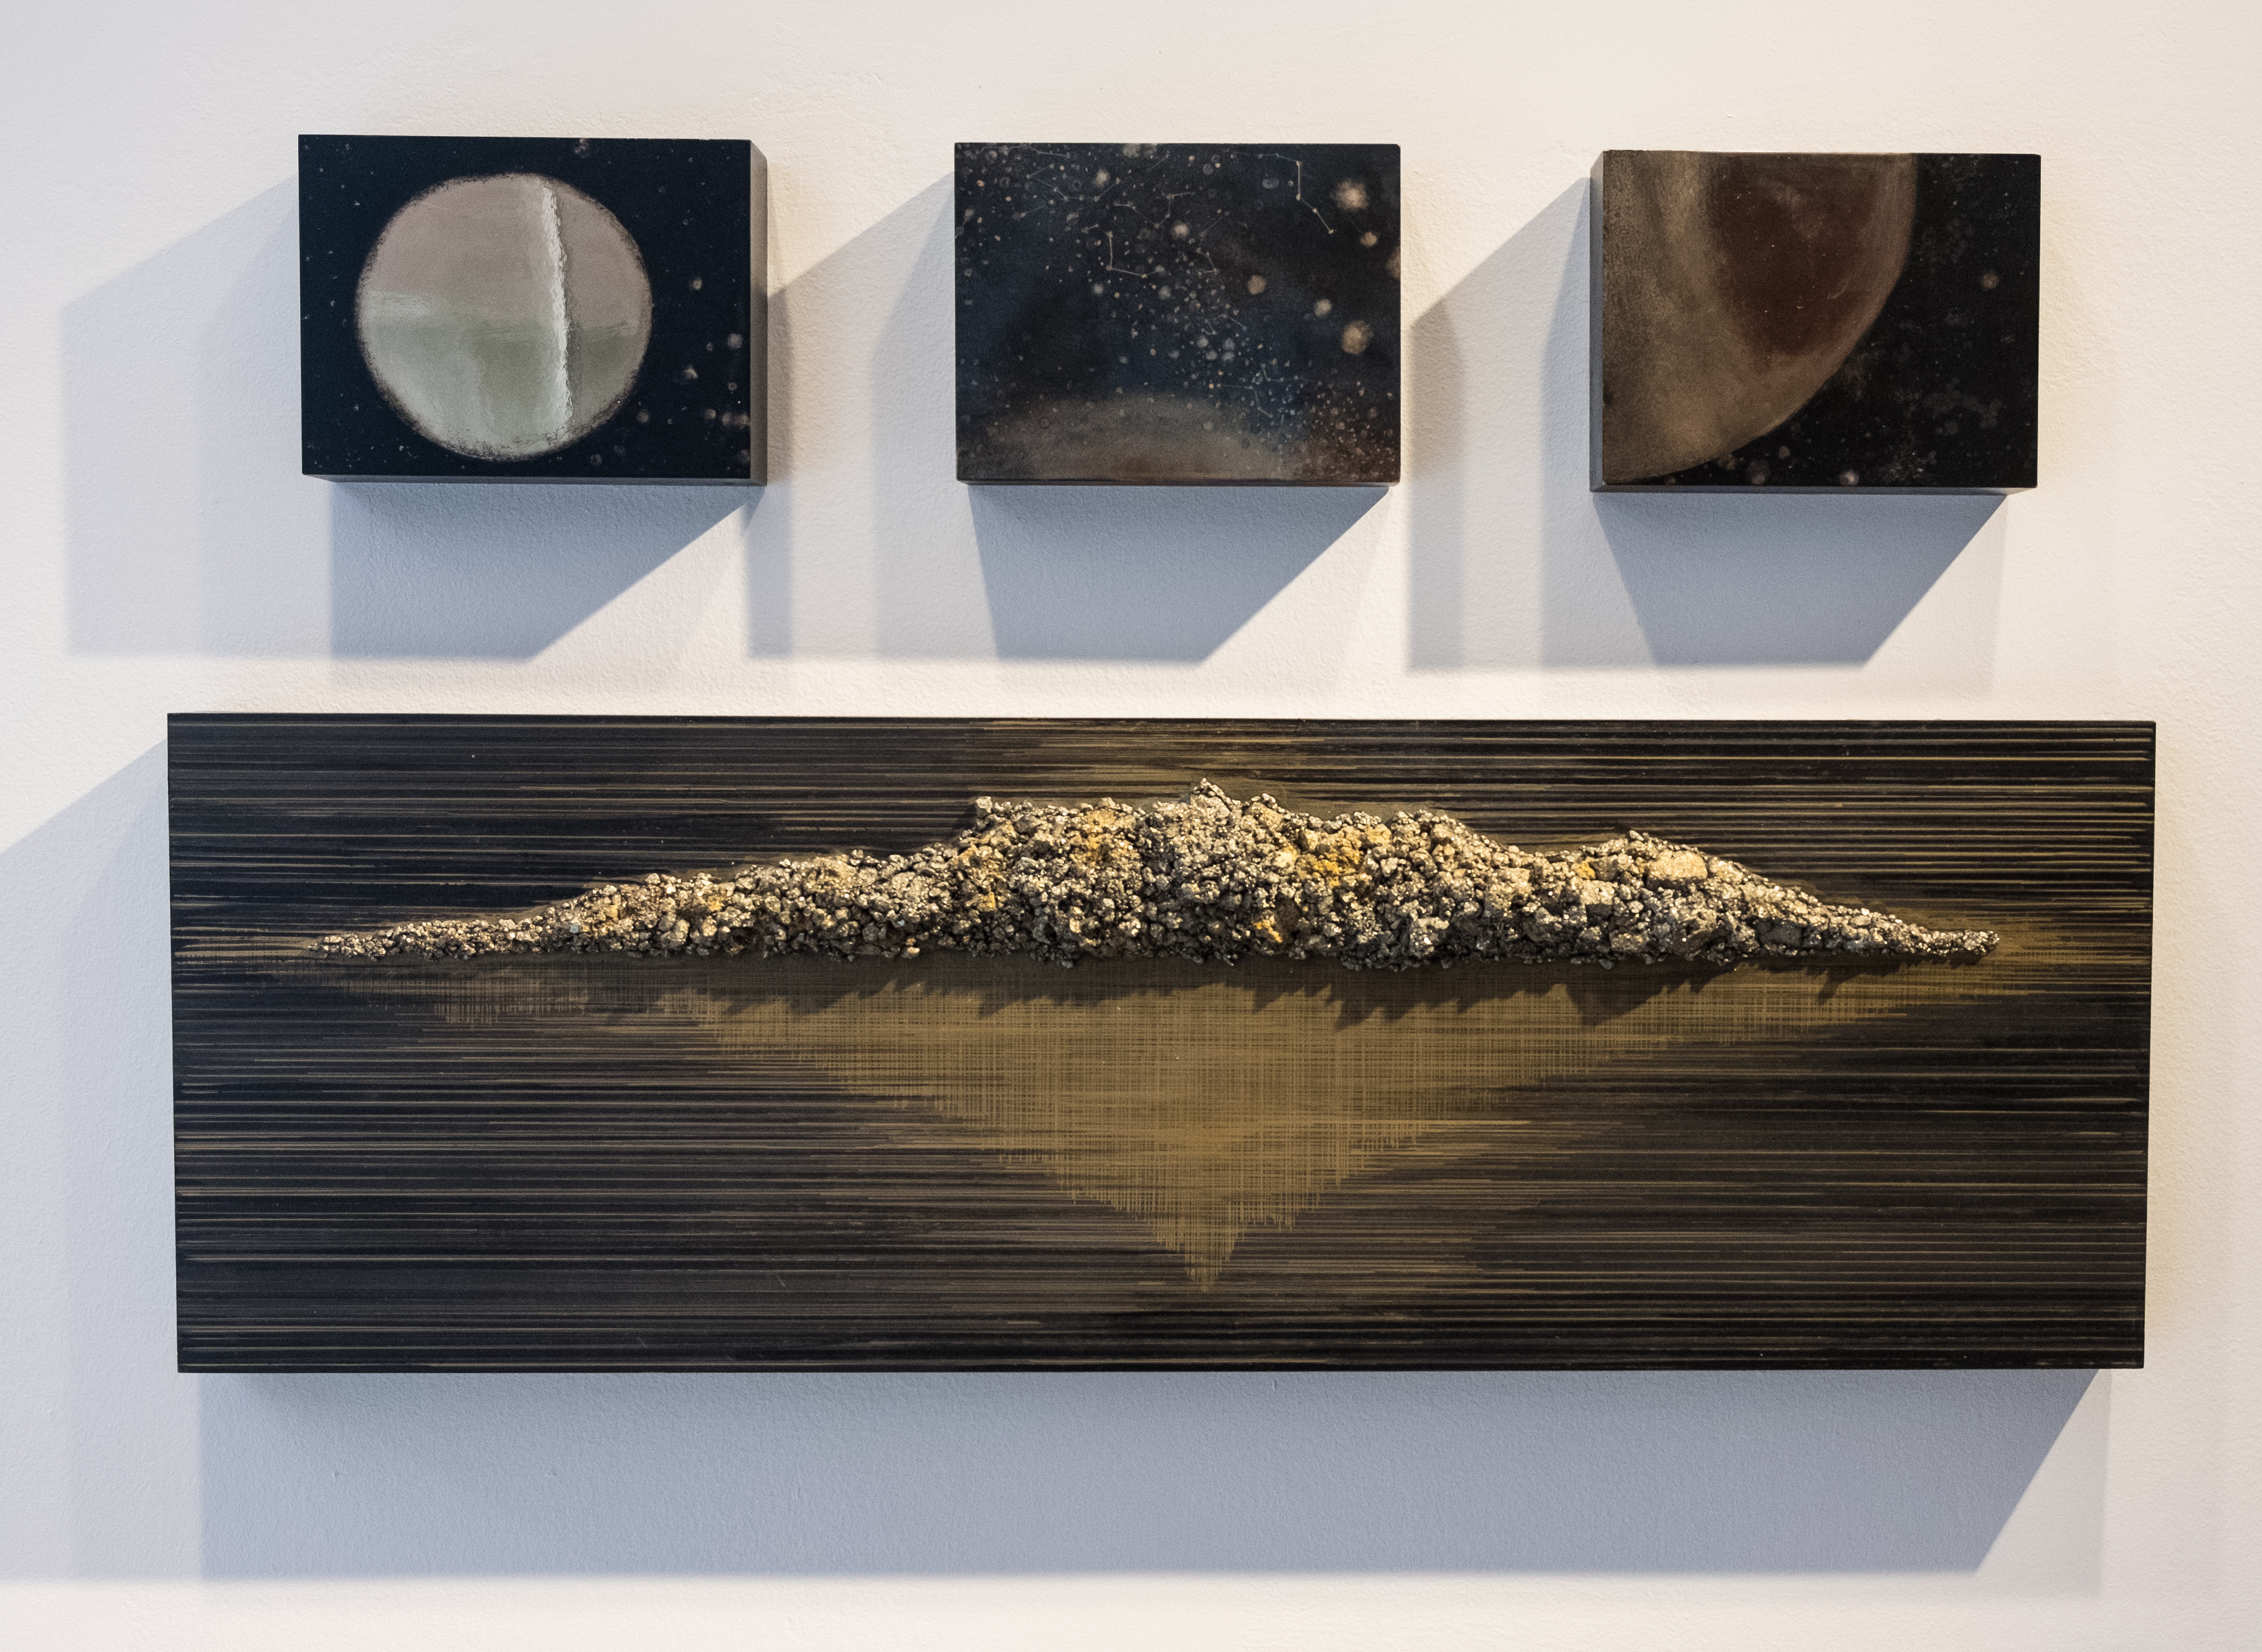 Teresita Fernández, *Aponte*, 2017; pyrite, oil, and graphite on wood panel, 21.5 x 36 x 2 in. overall (courtesy of the artist and Lehmann Maupin, New York; photograph by Yolanda Navas).